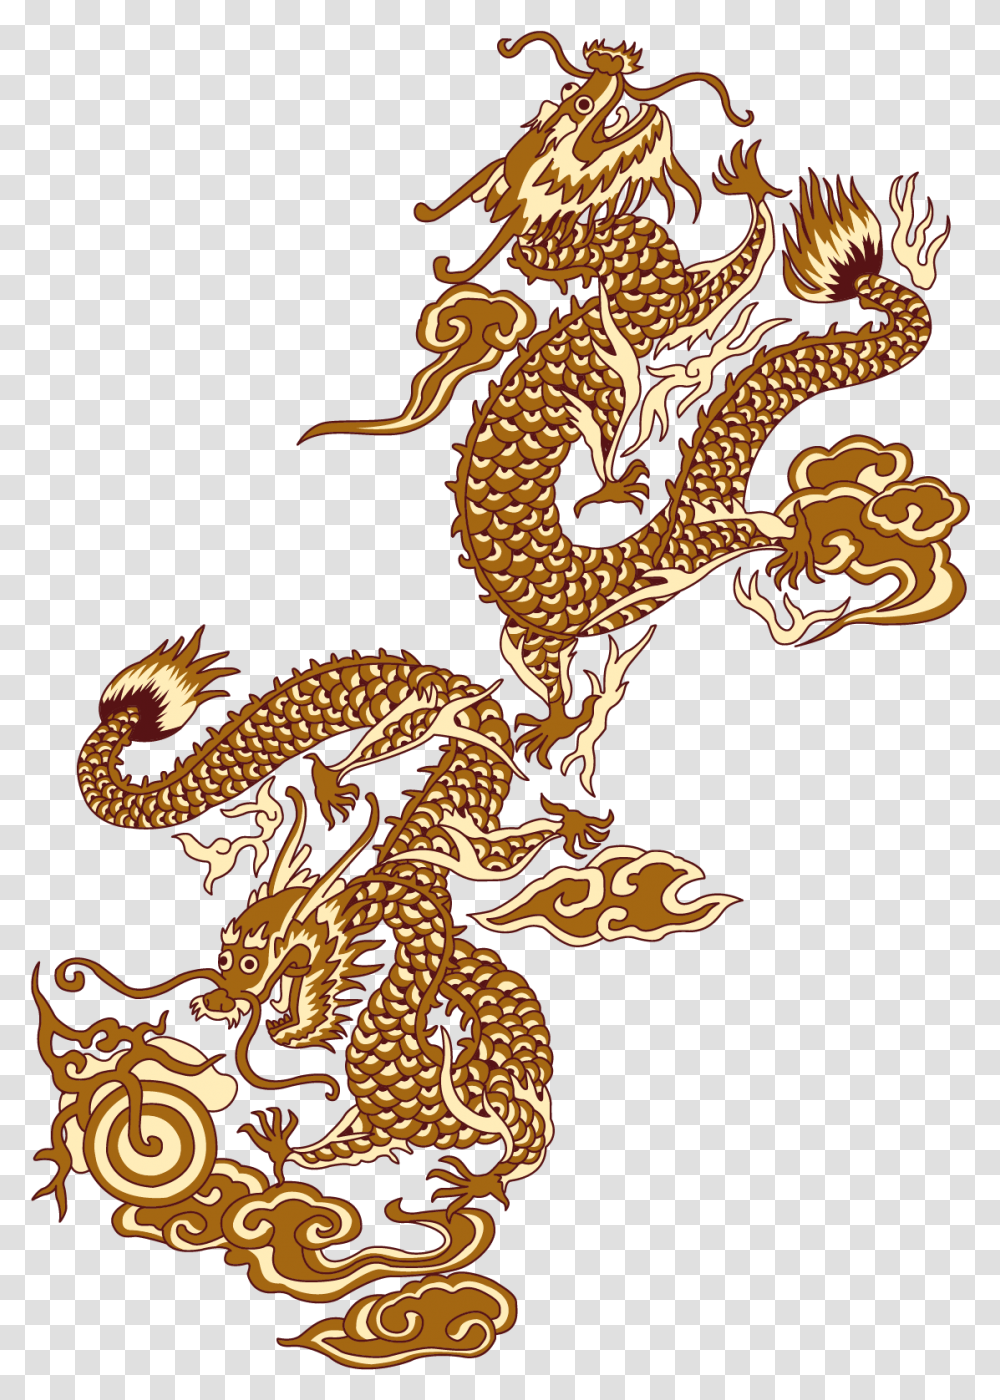 China Chinese Dragon Chinese Dragon Free Background Transparent Png